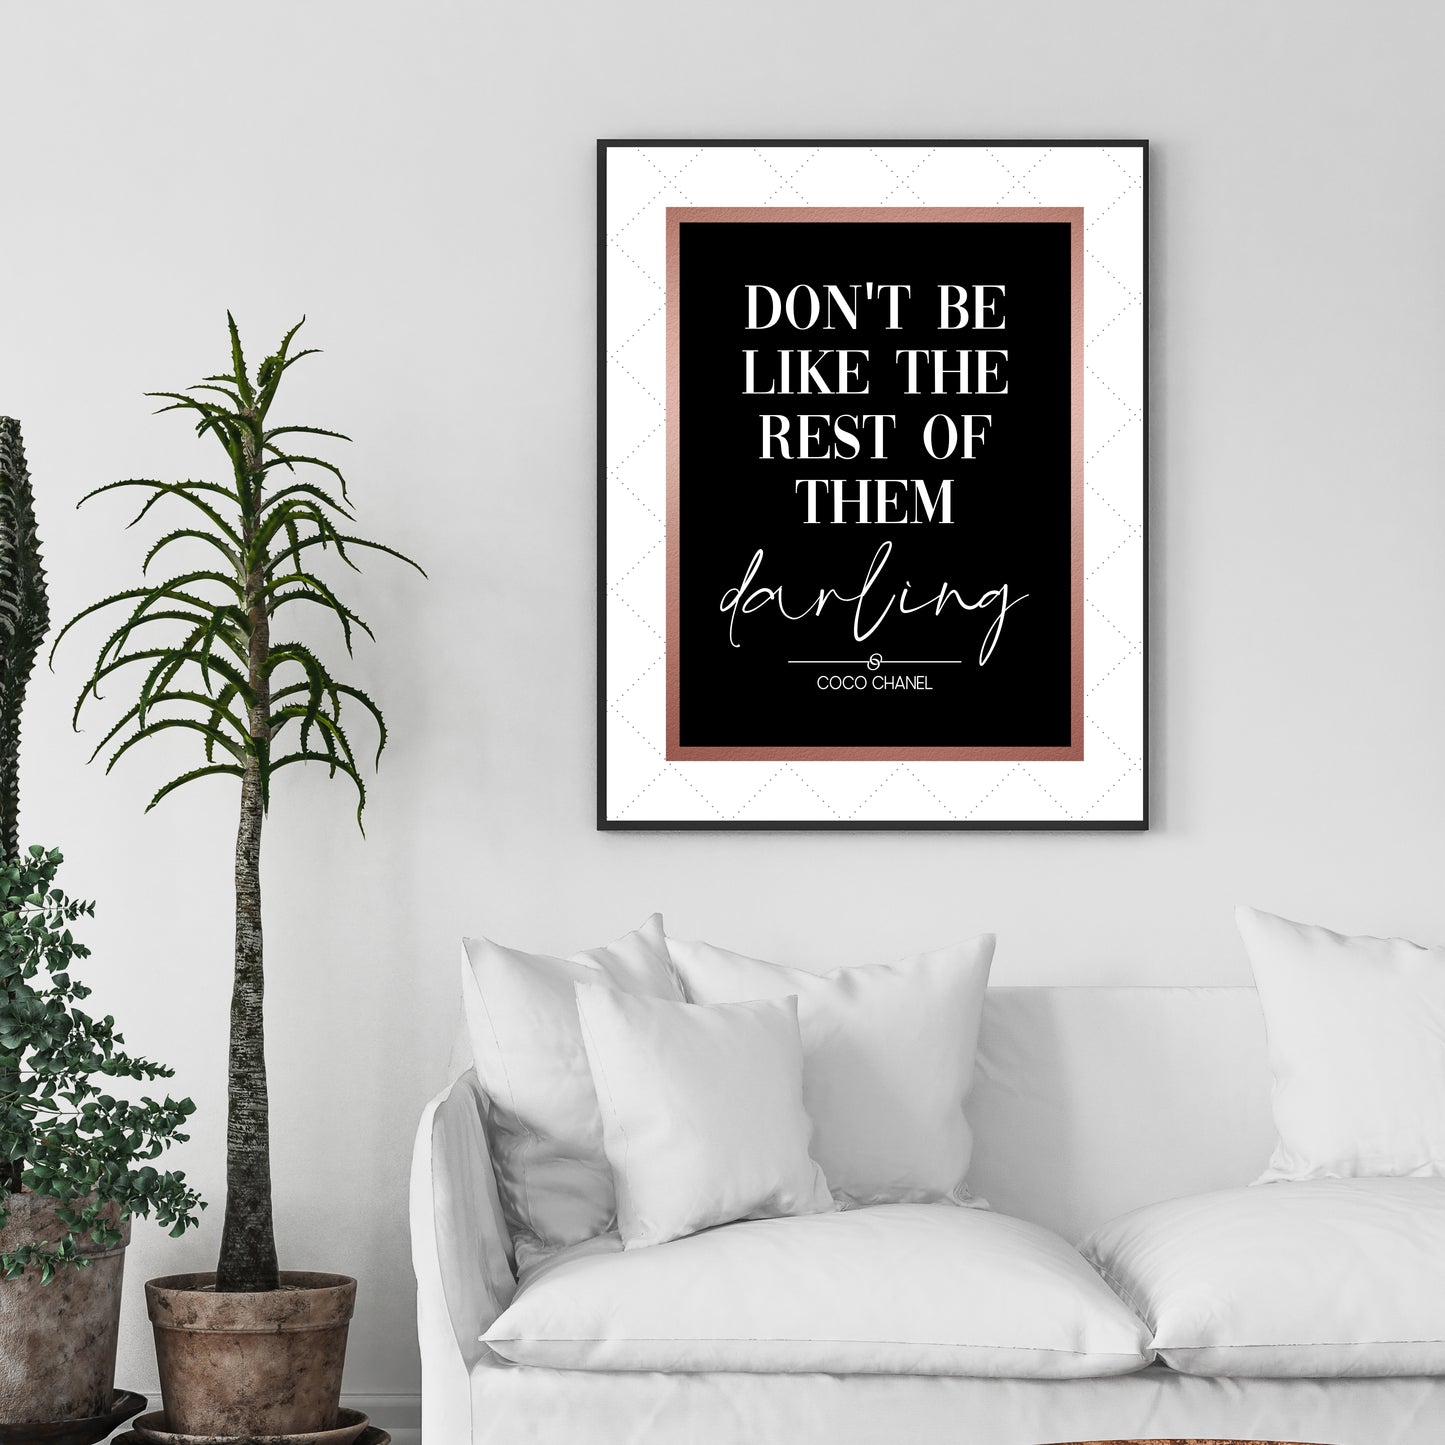 "Don't Be Like The Rest Of Them Darling," Famous Quote by Coco Chanel With Rose Gold Border, Printable Art